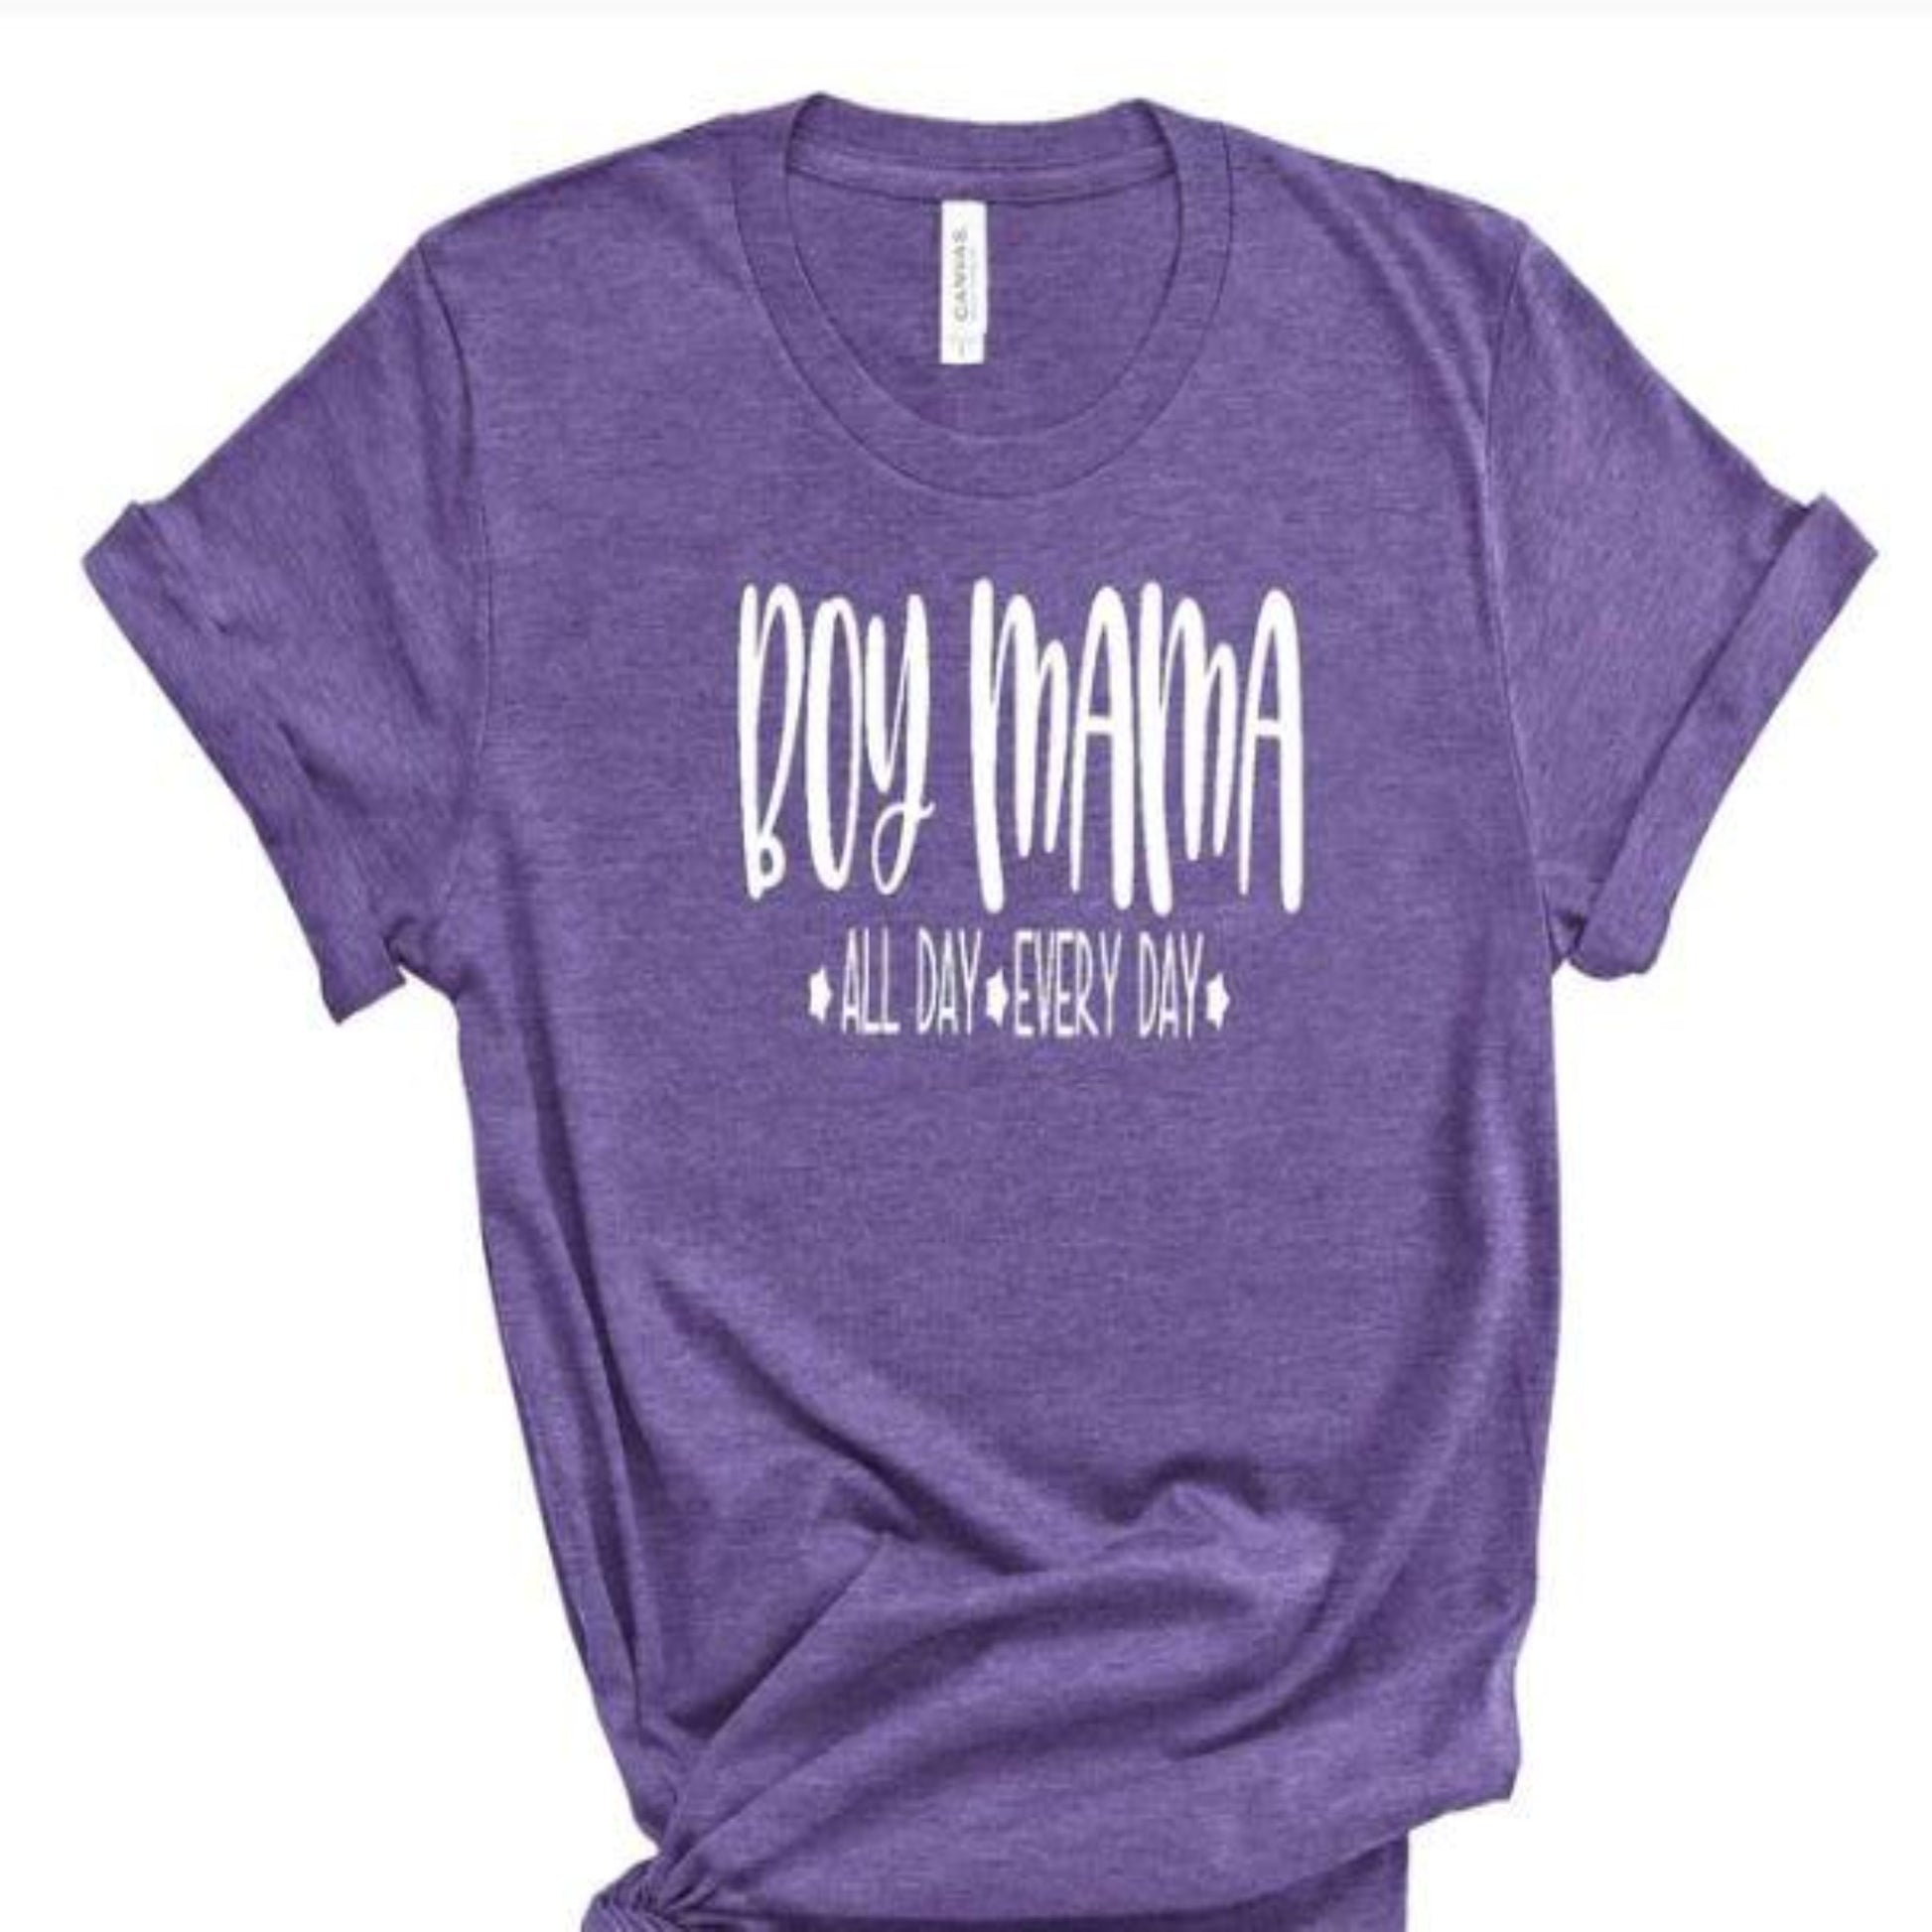 boy_mama all_day shirt everyday specialty tee 